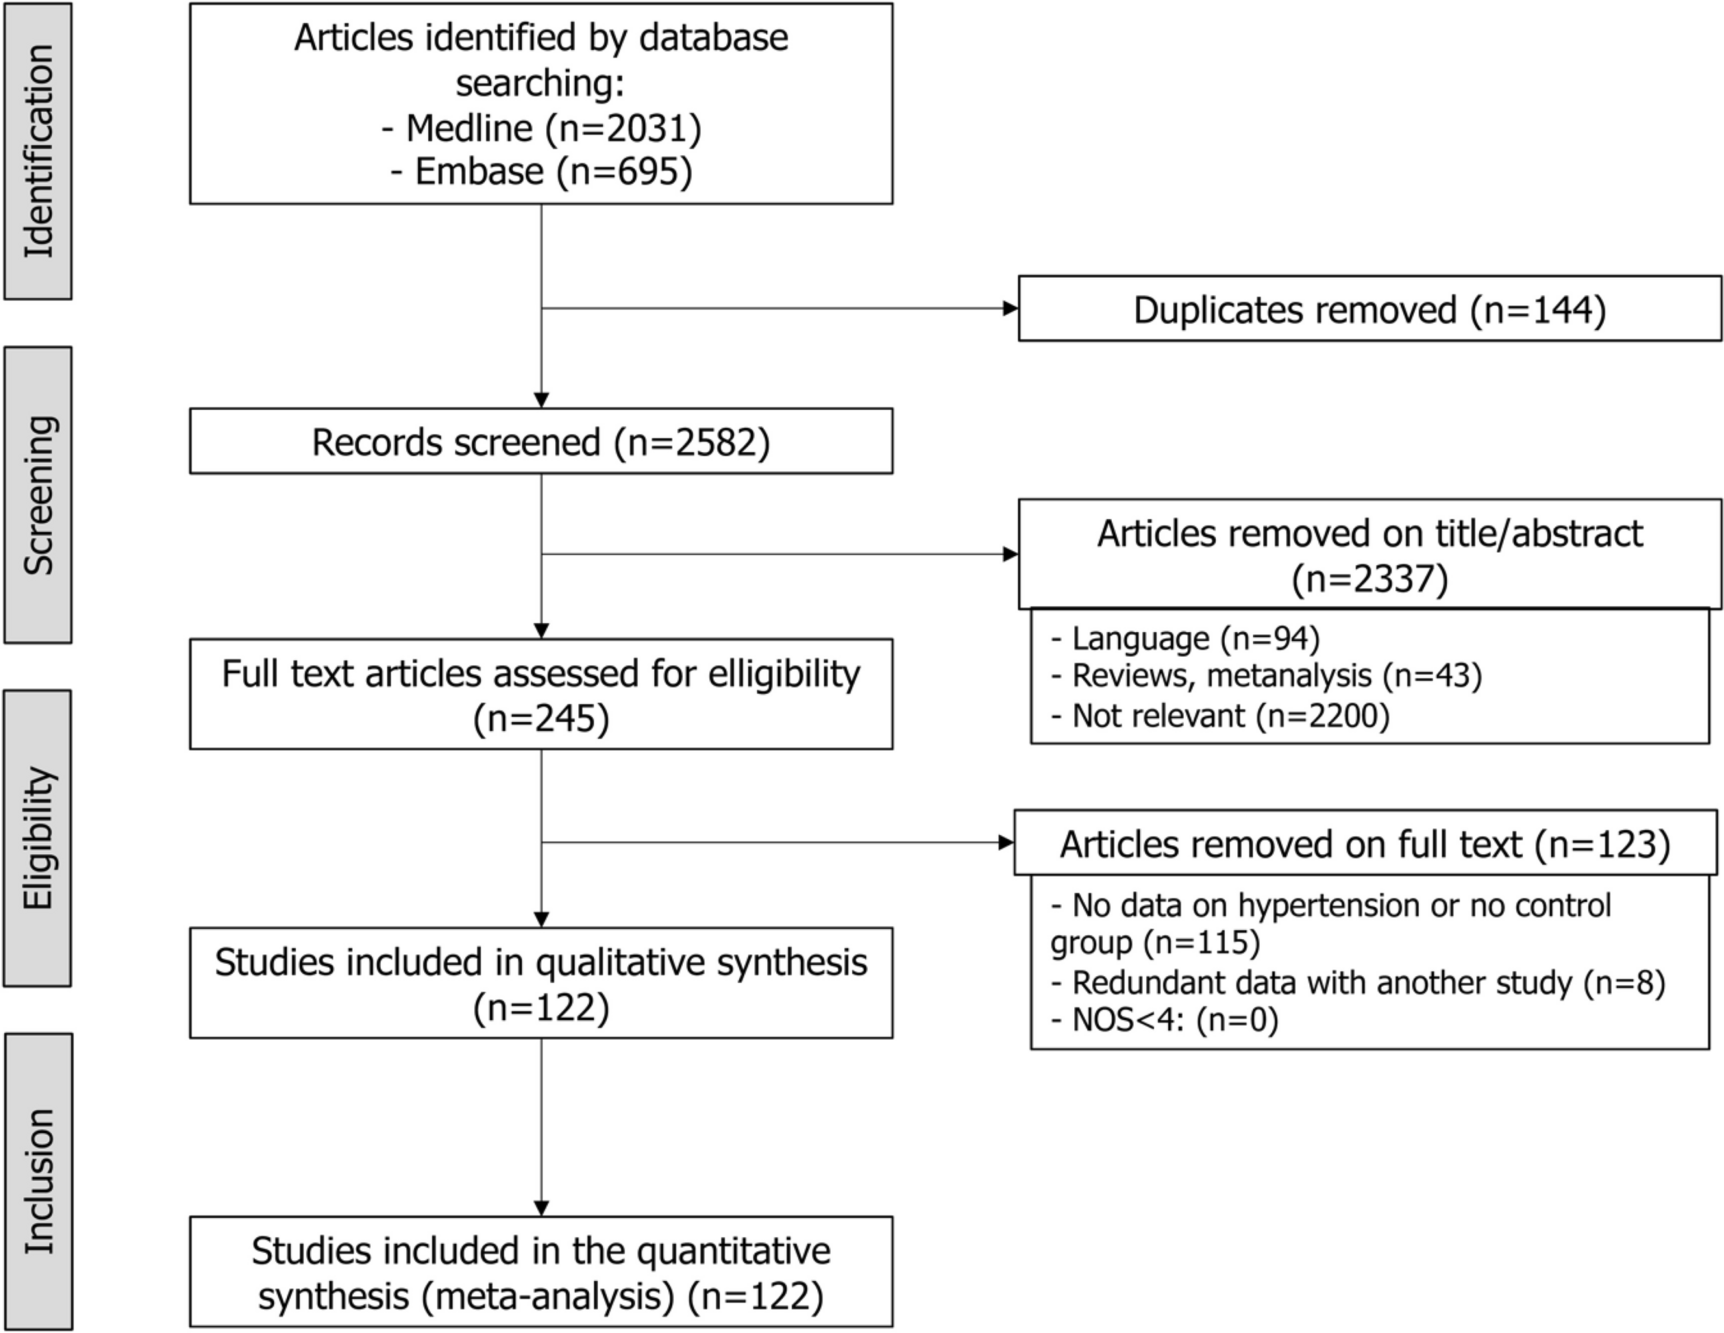 Hypertension and Cardiovascular Outcomes in Inflammatory and Autoimmune Diseases: A Systematic Review and Meta-analysis